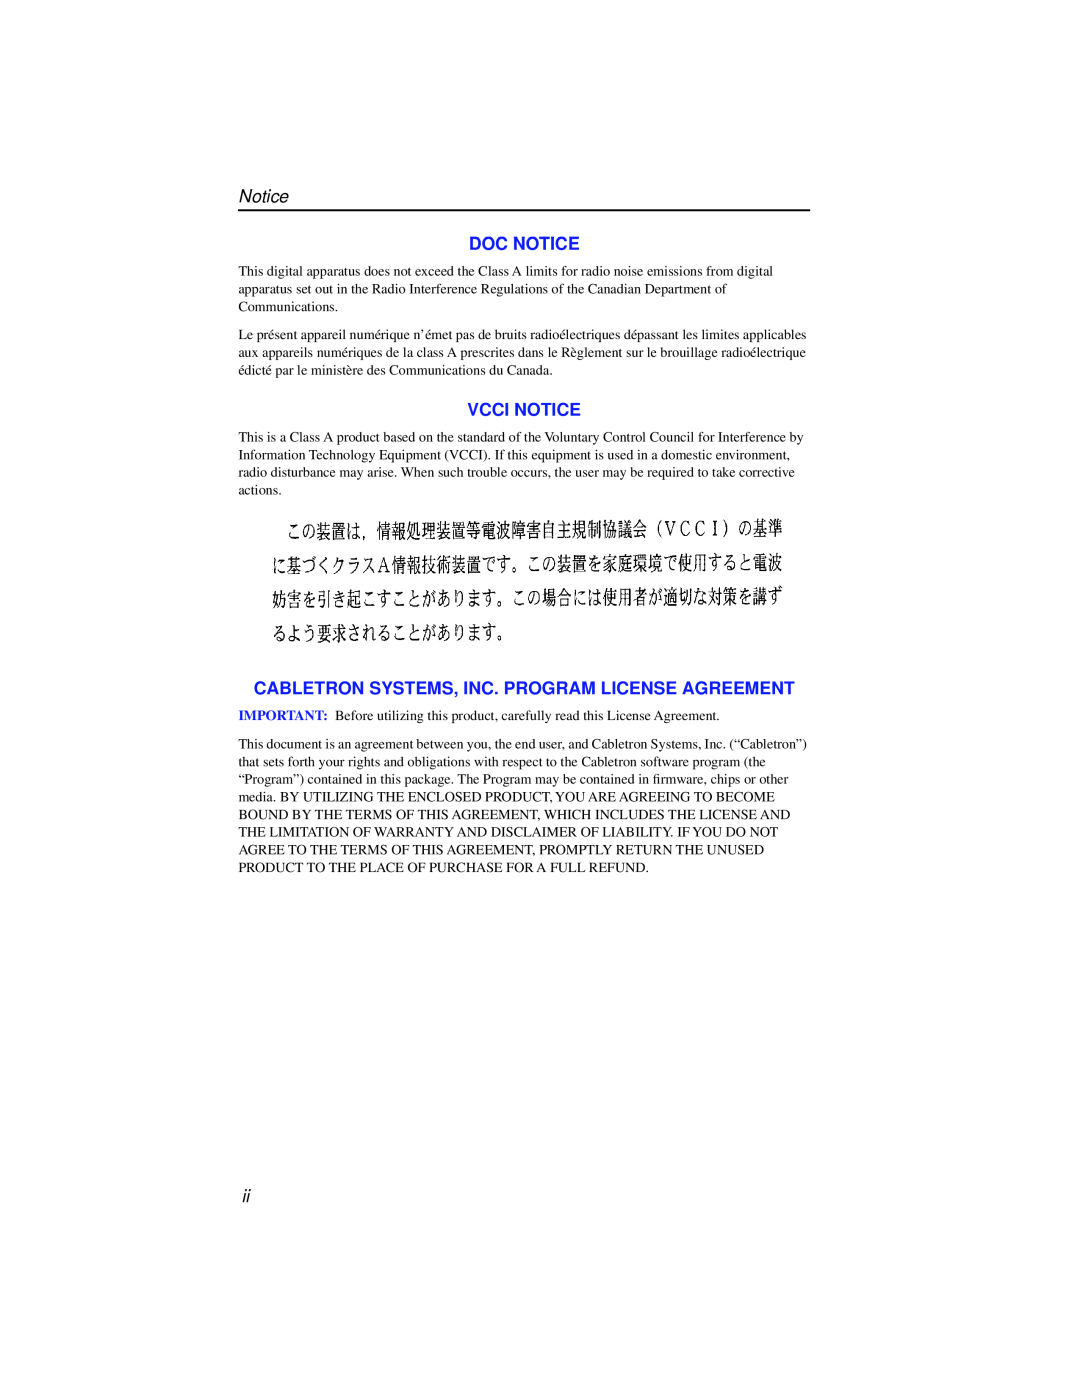 Cabletron Systems ELS10-26 manual Doc Notice, Vcci Notice, Cabletron Systems, Inc. Program License Agreement 